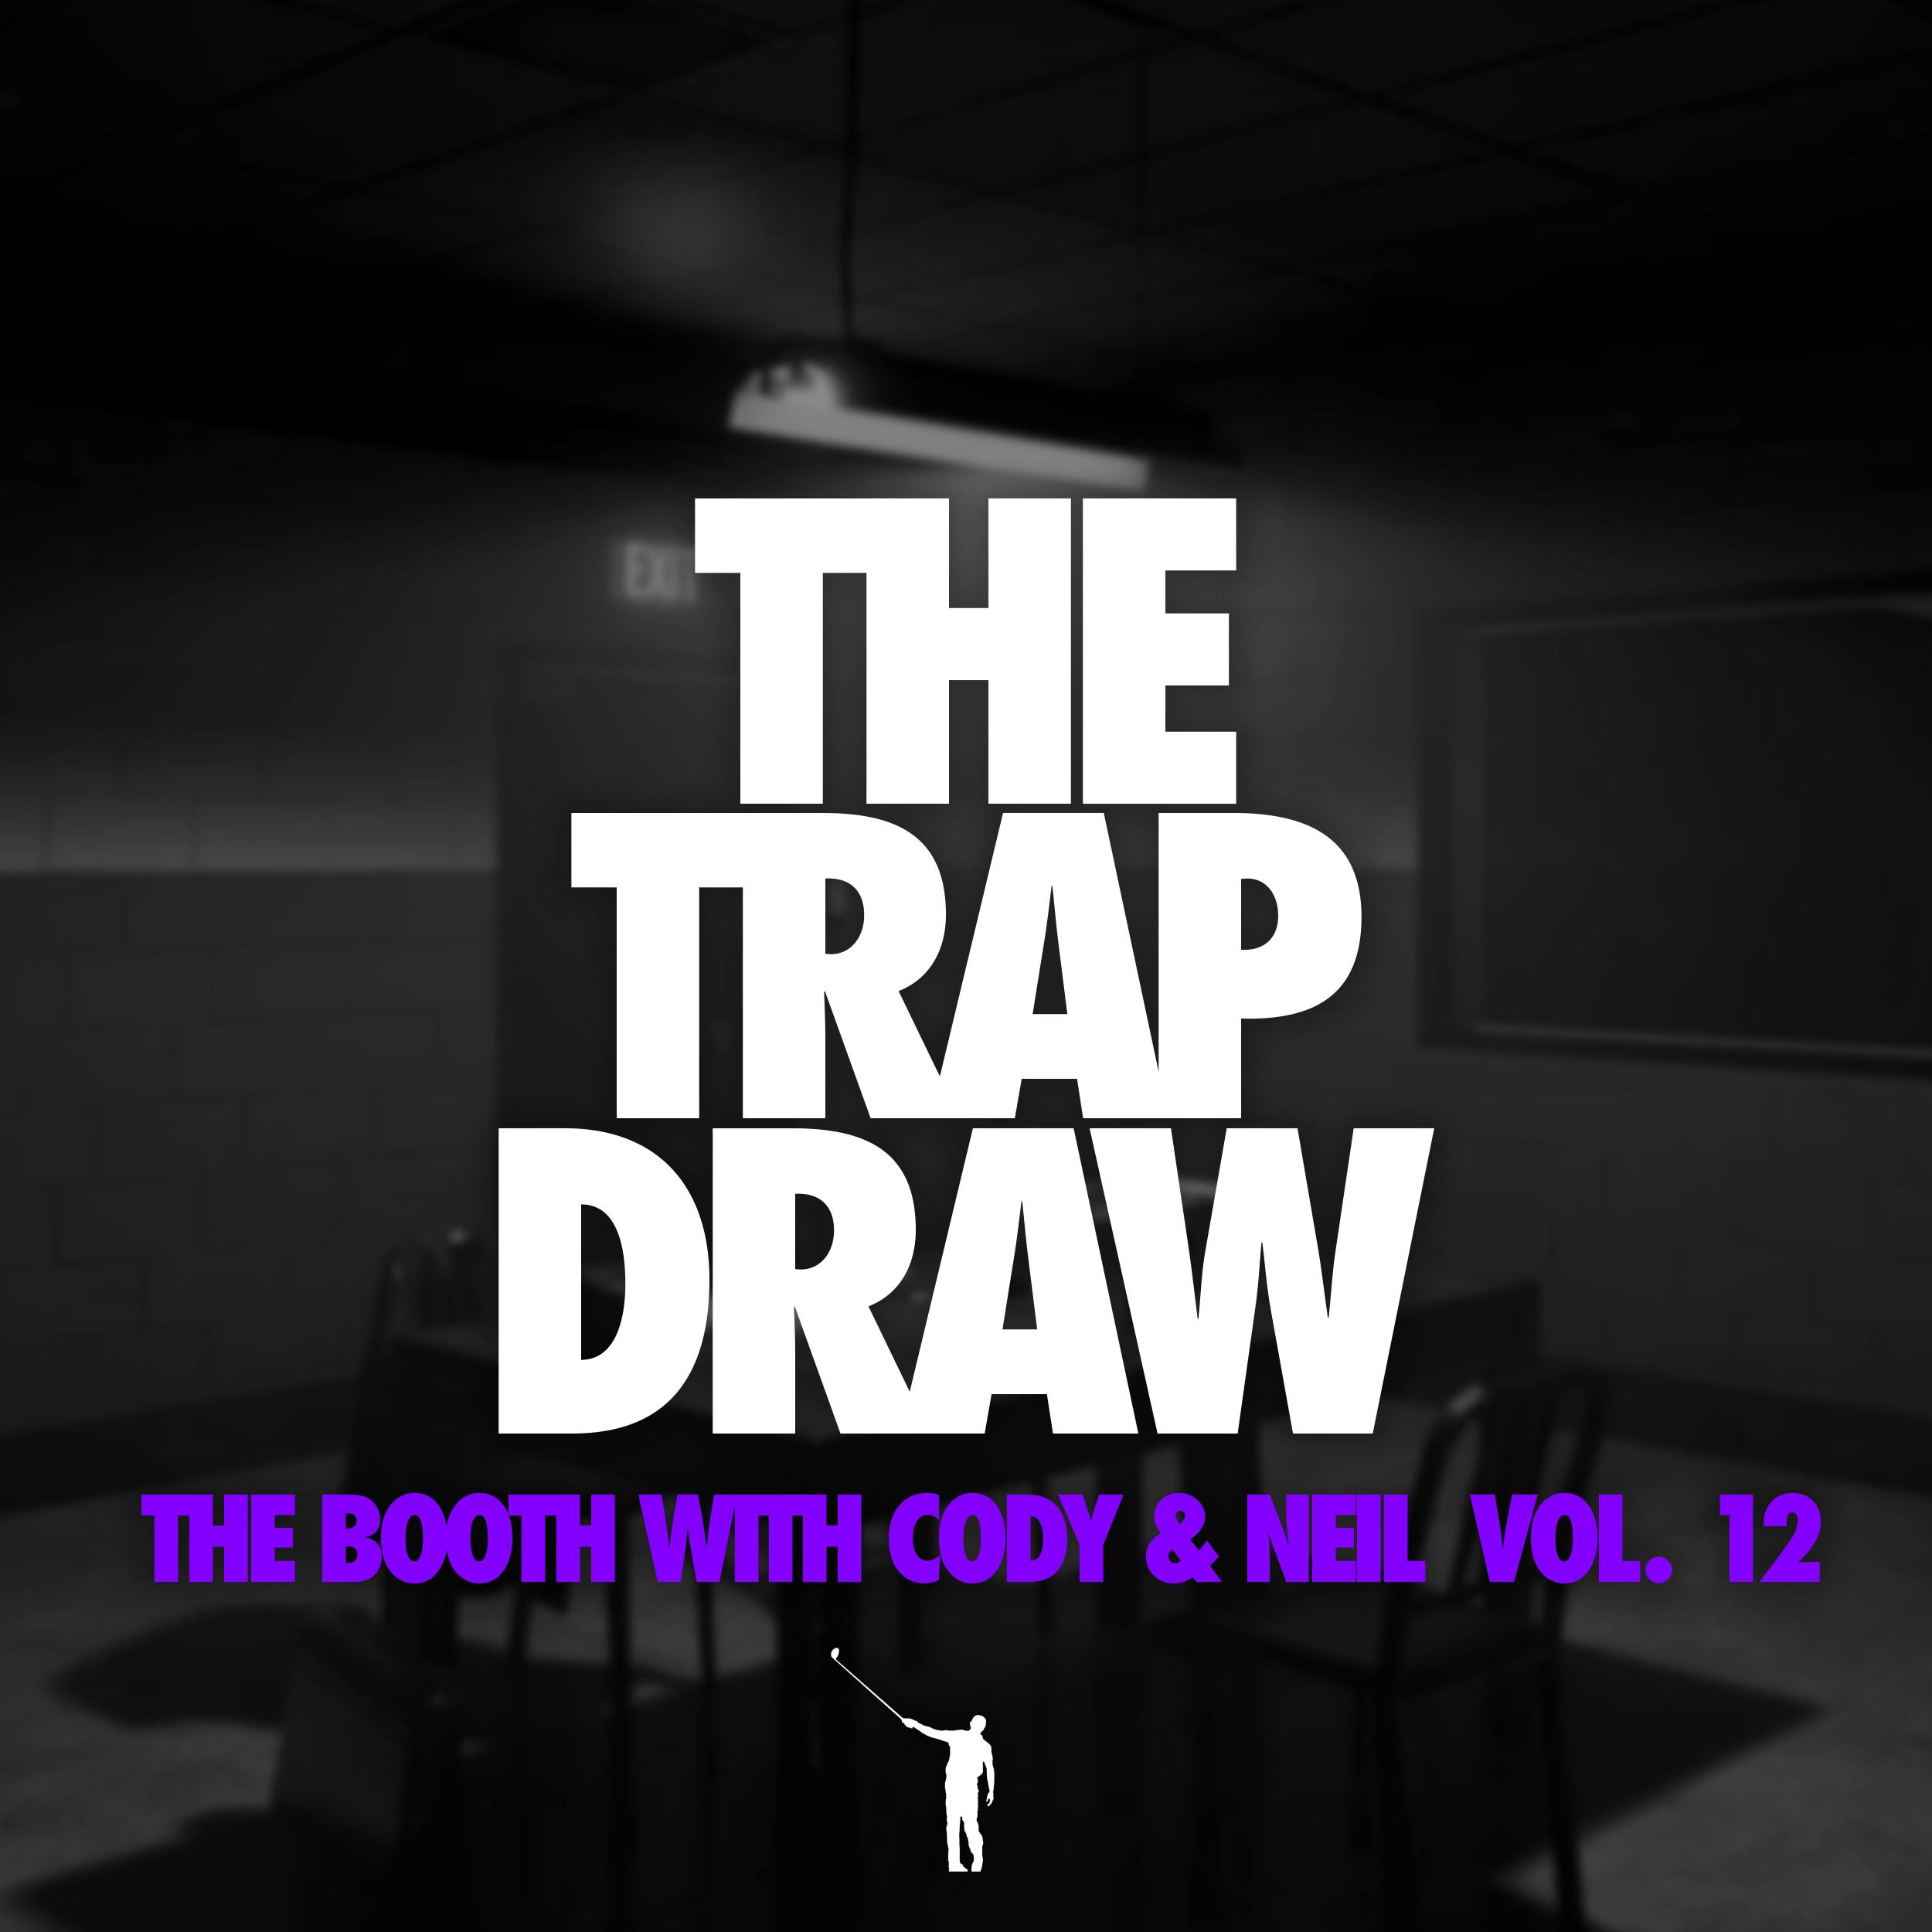 285: The Booth Vol. 12